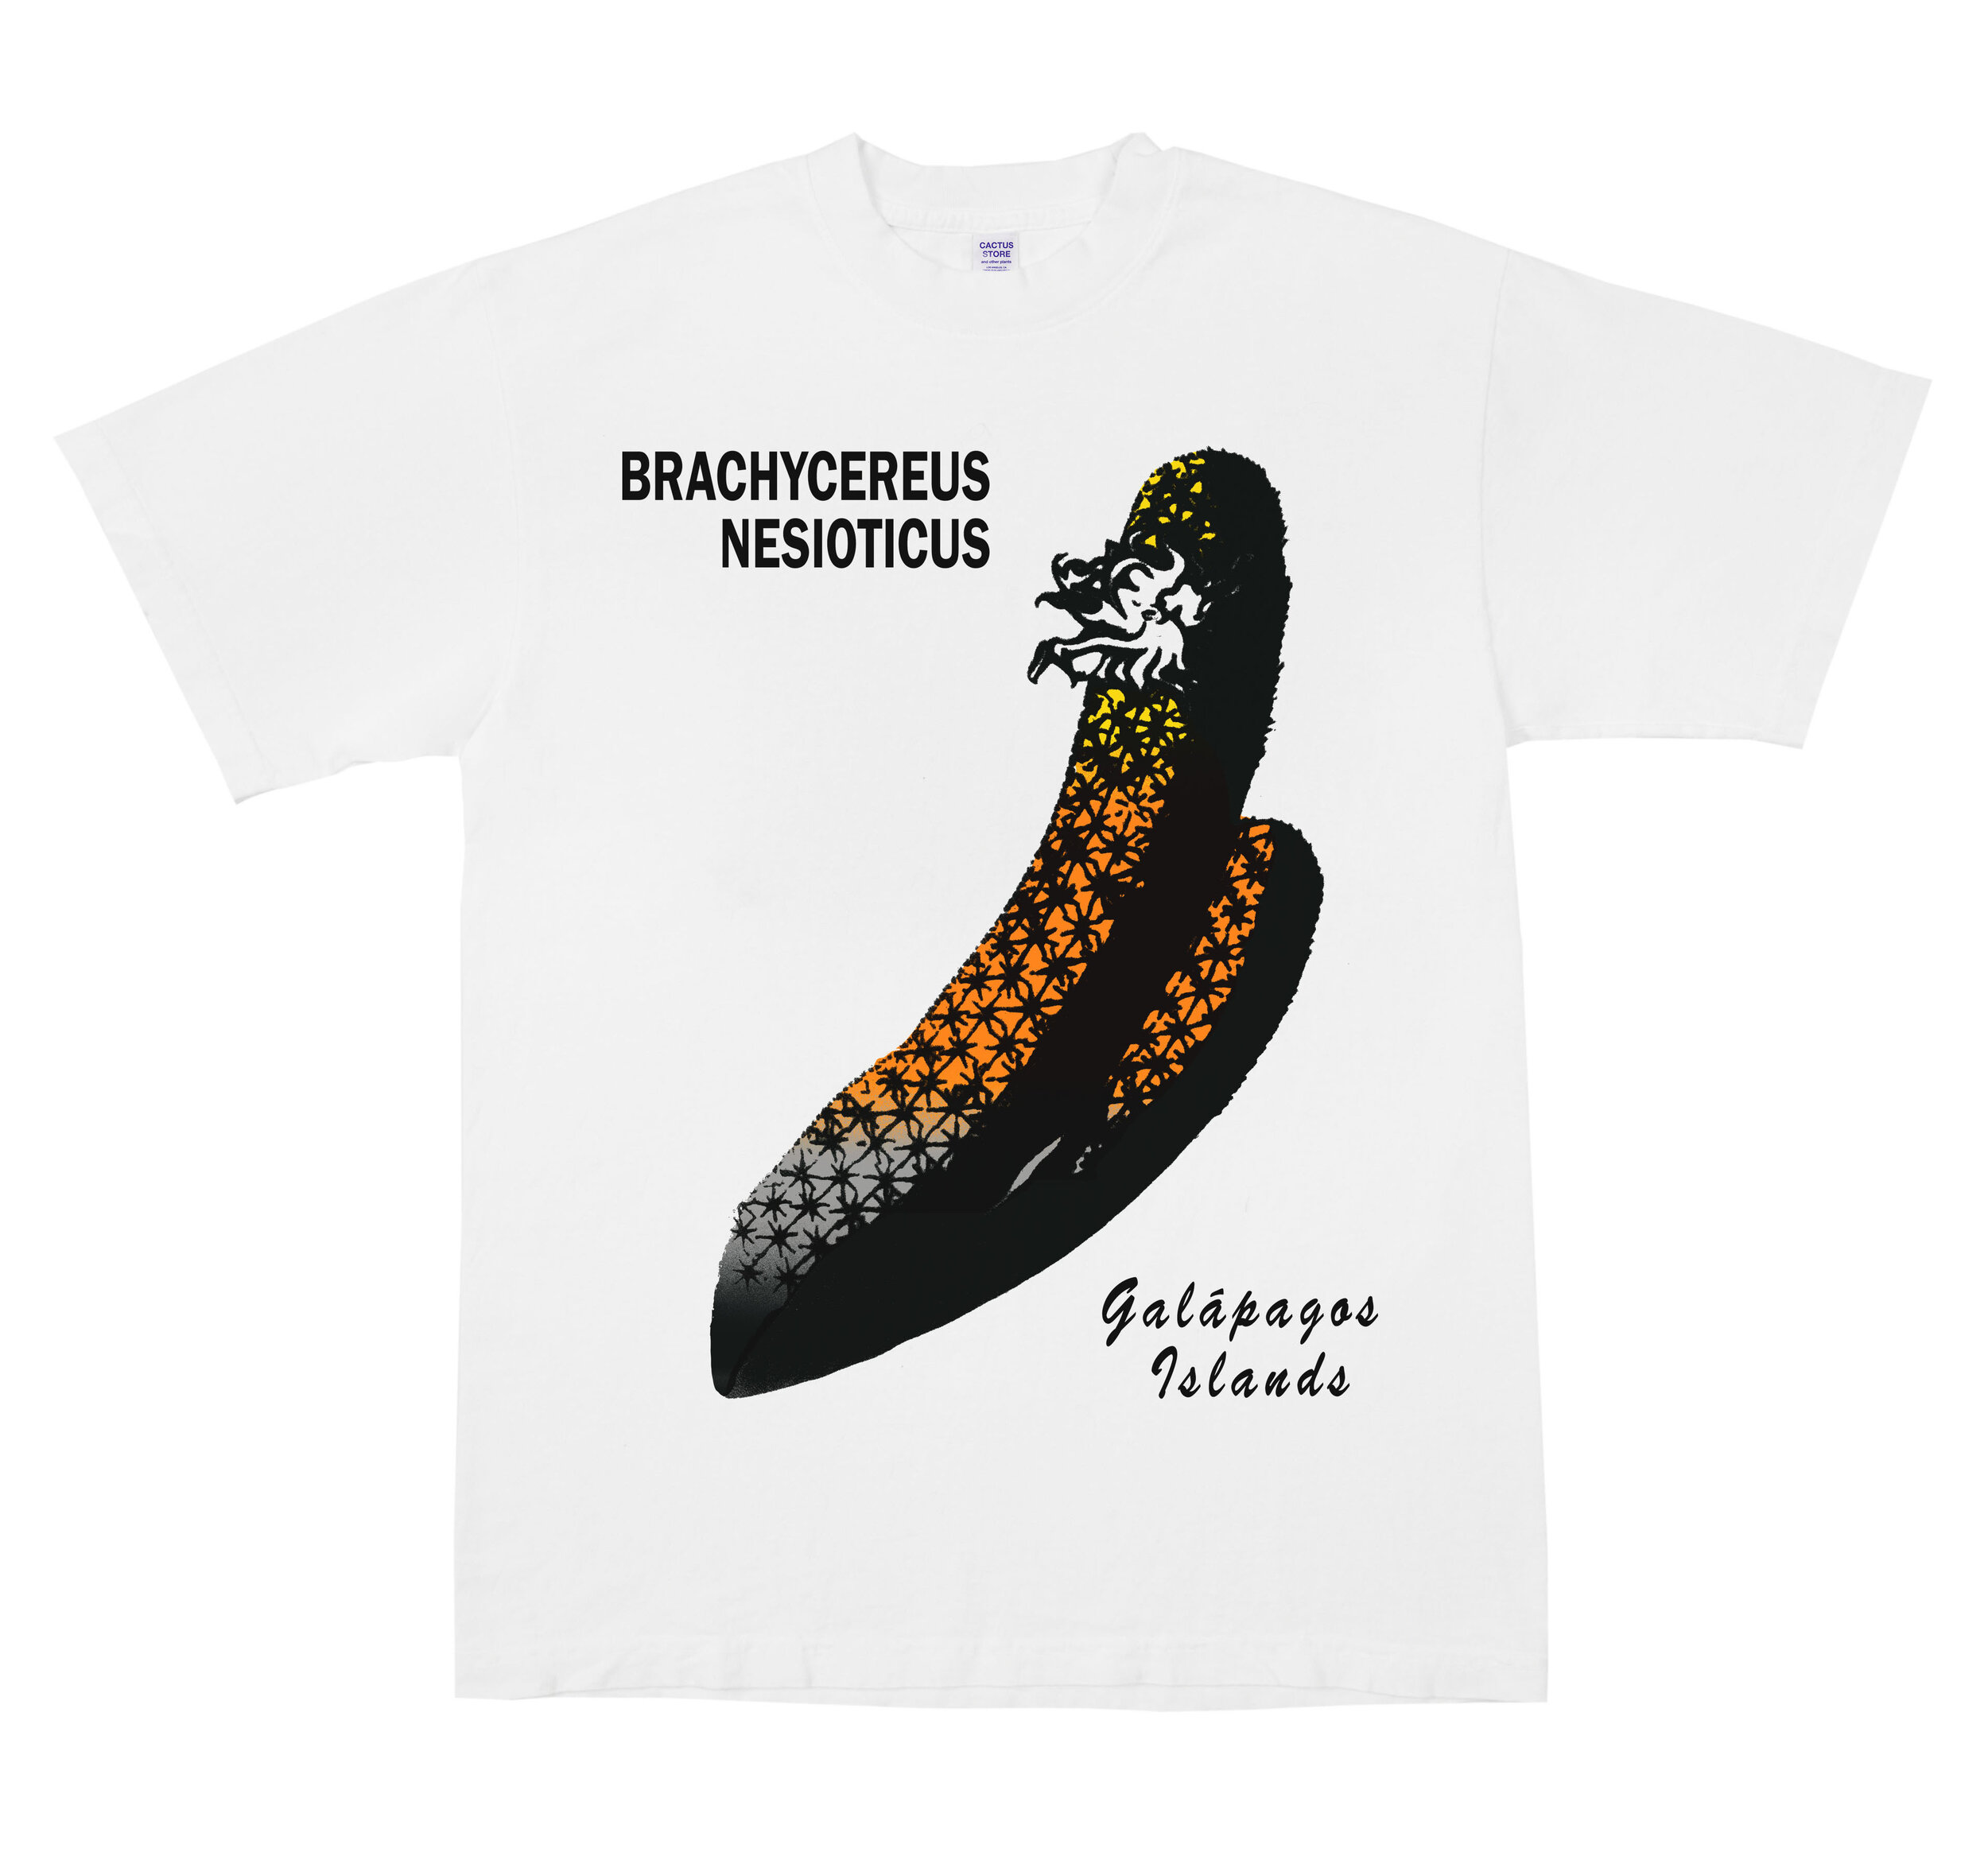  In that great laboratory of evolution where marine Iguanas reign,  Brachycereus nesioticus  grows without soil on barren lava fields. -Cactus Store  